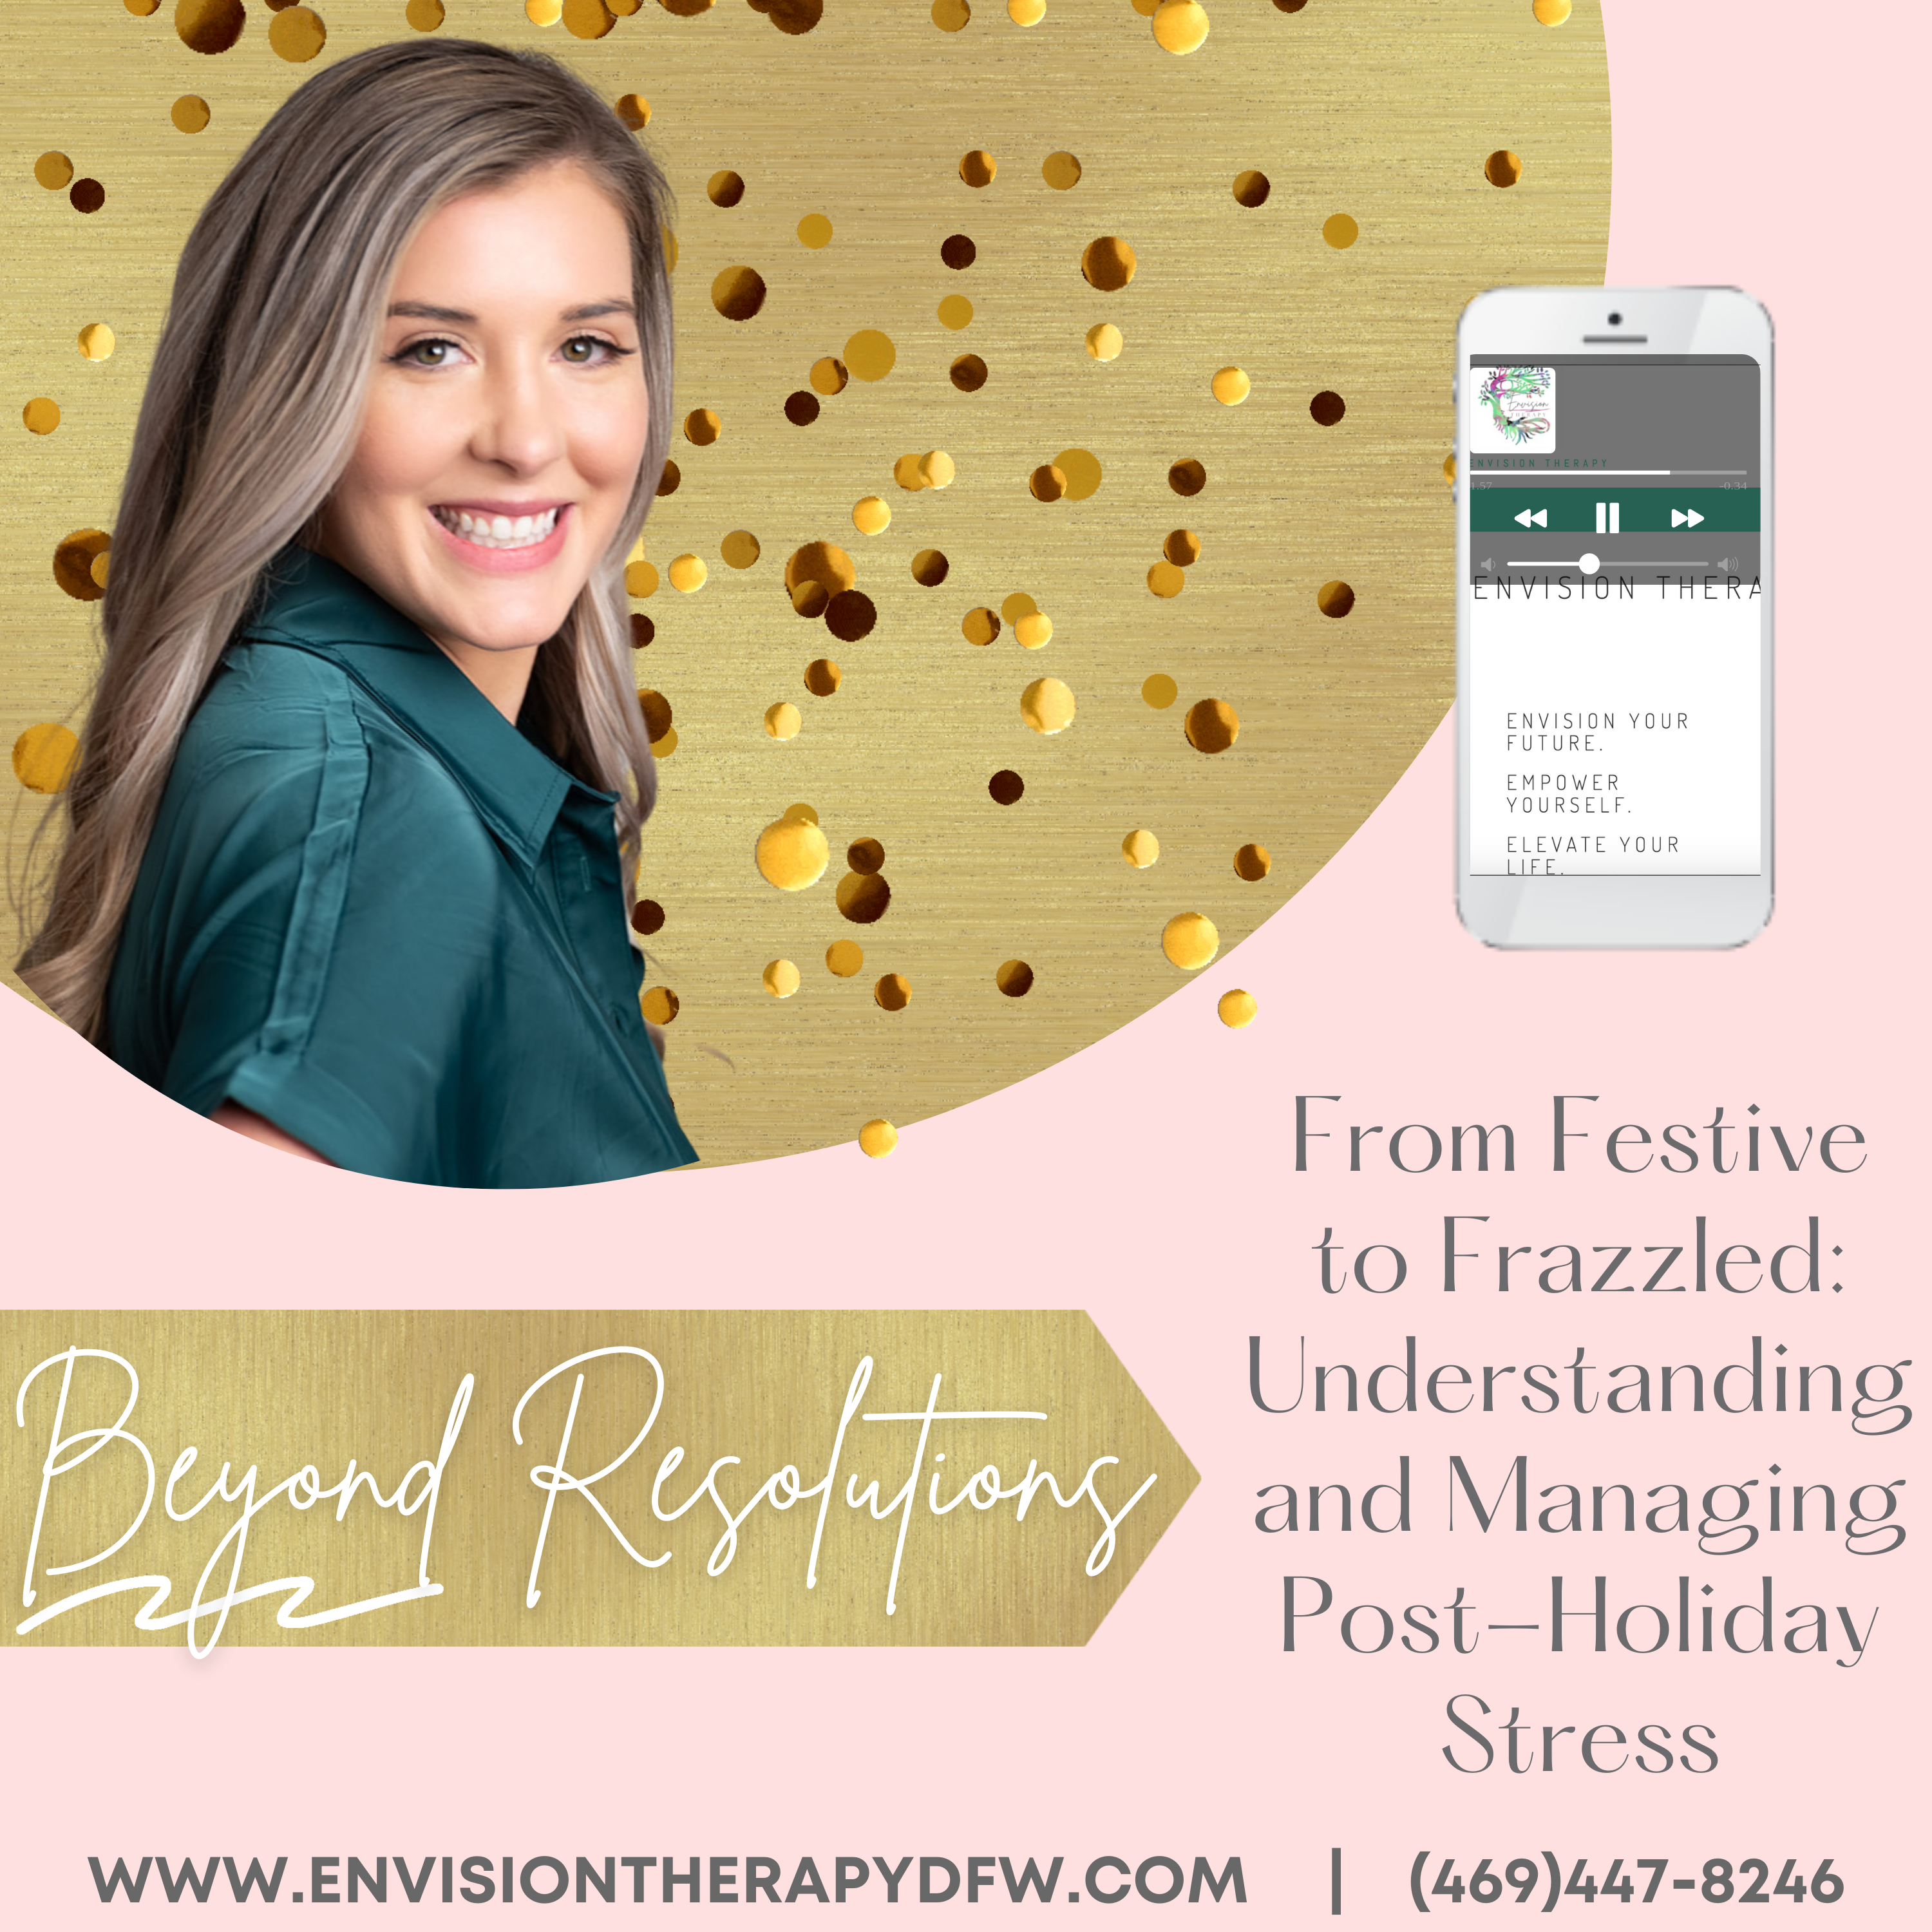 post-holiday stress, stress management, holiday reflections, realistic resolutions, financial planning, self-care, emotional well-being, coping strategies, social fatigue, resilience